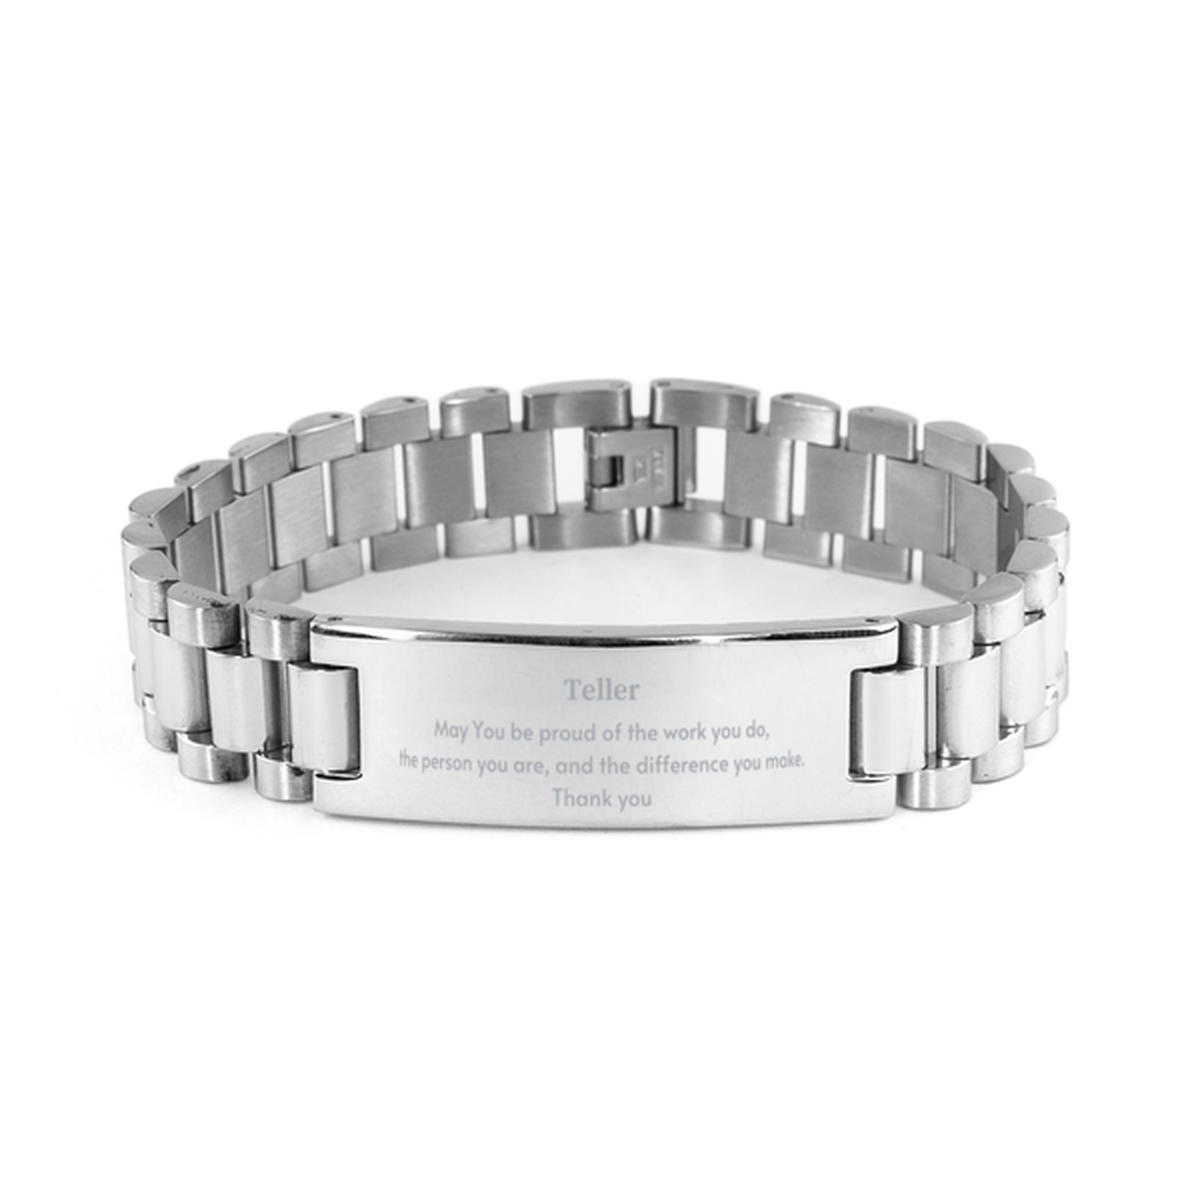 Heartwarming Ladder Stainless Steel Bracelet Retirement Coworkers Gifts for Teller, Teller May You be proud of the work you do, the person you are Gifts for Boss Men Women Friends